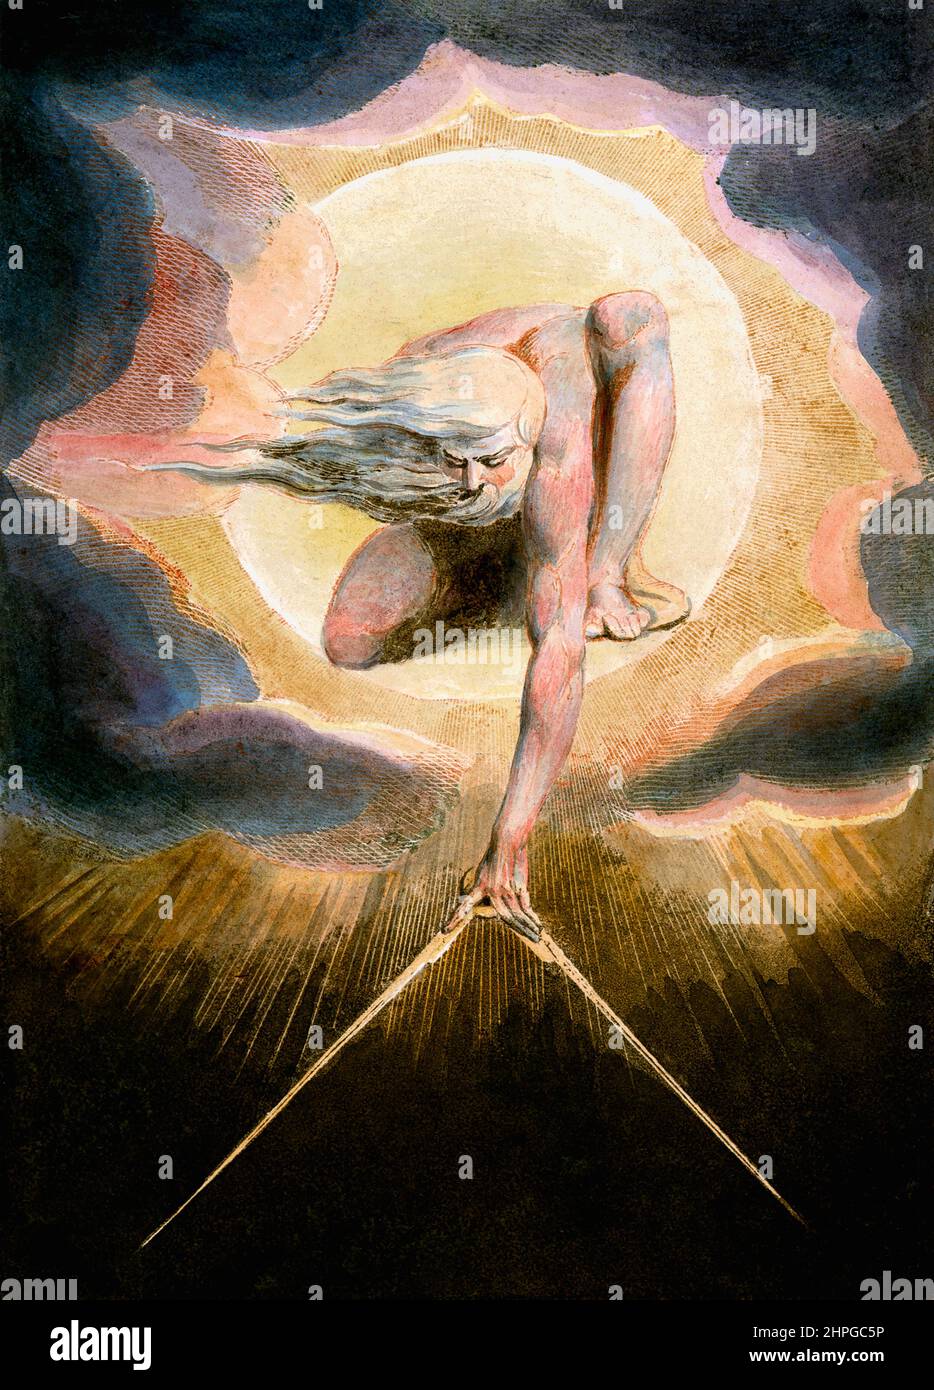 The Ancient of Days.  Frontispiece of Europe a Prophecy, first published in 1794.  By English poet and artist William Blake, 1757 - 1827.  The picture shows Urizen measuring the universe to fashion a predictable and conventional world of his own.  Urizen was part of Blake's mythology. Stock Photo